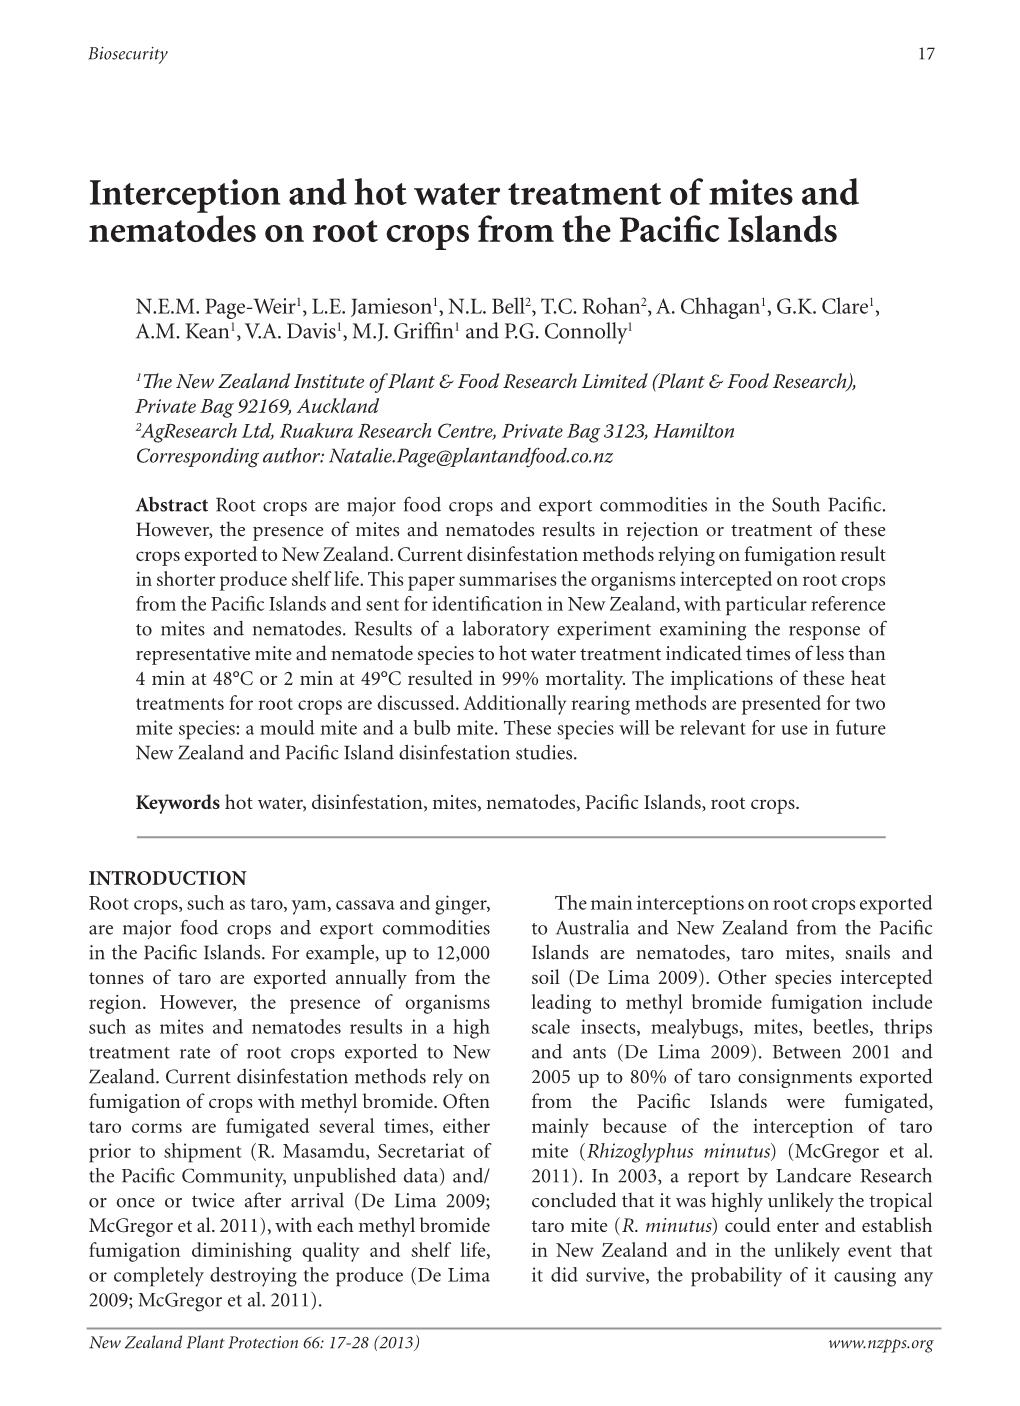 Interception and Hot Water Treatment of Mites and Nematodes on Root Crops from the Pacific Islands